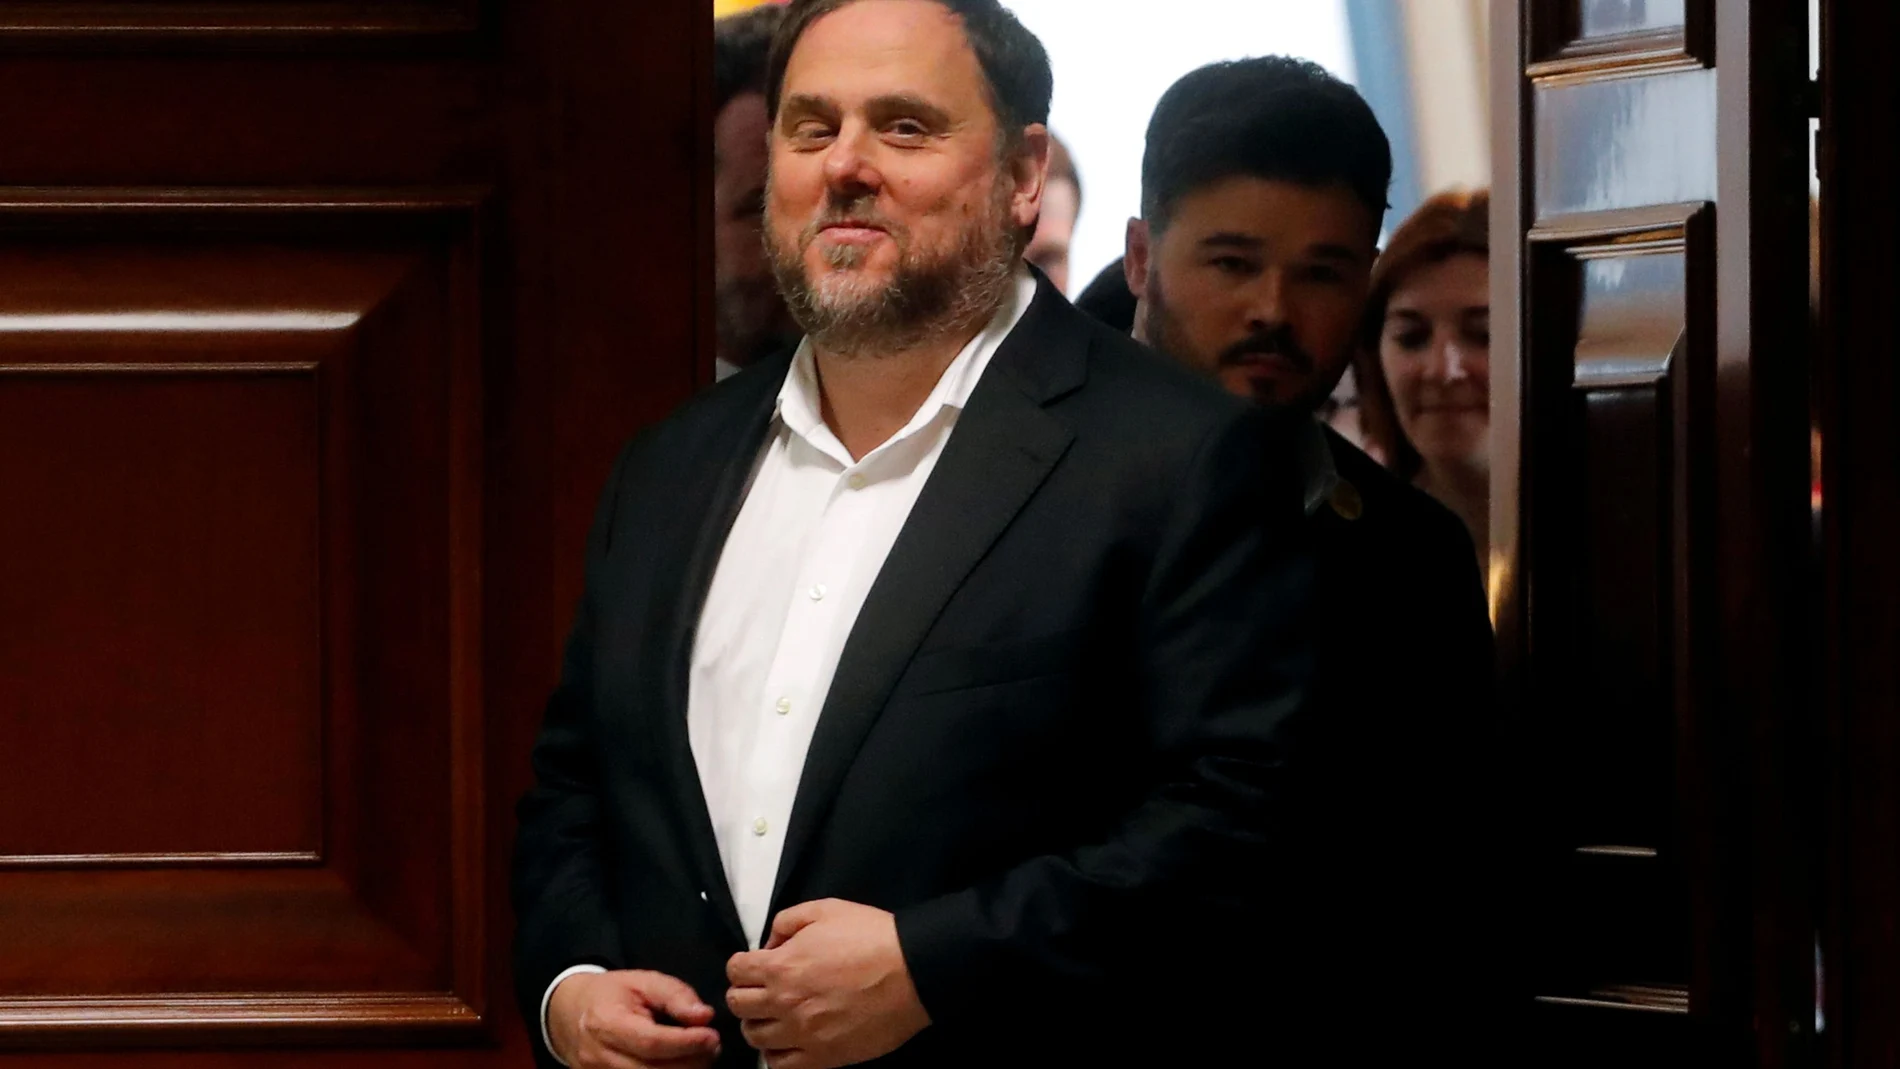 FILE PHOTO: Jailed Catalan politician Oriol Junqueras leaves after getting his parliamentary credentials at Spanish Parliament, in Madrid